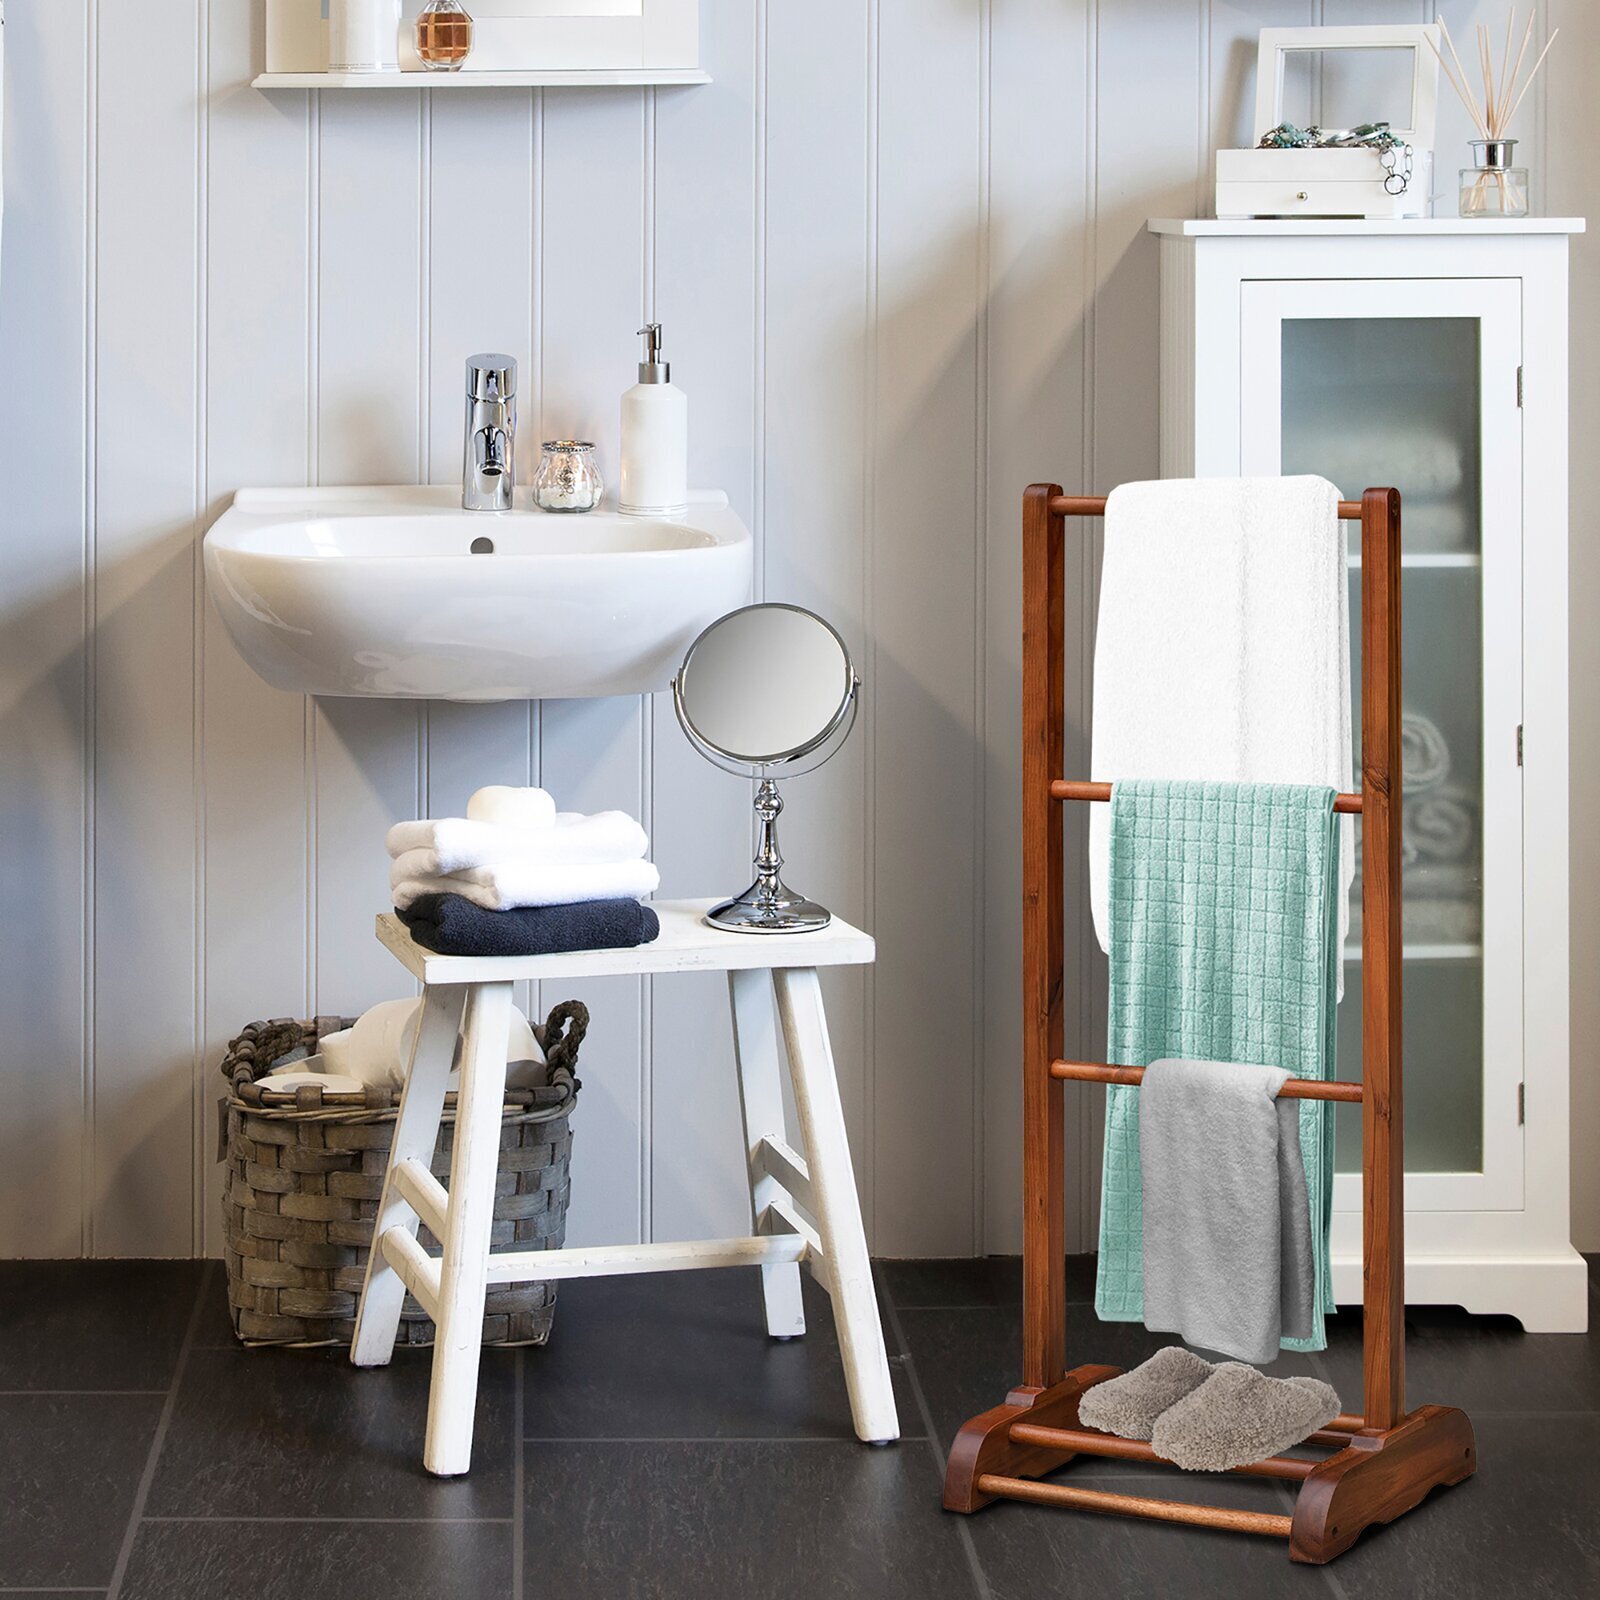 Classic Freestanding Wooden Towel Rail For Every Bathroom